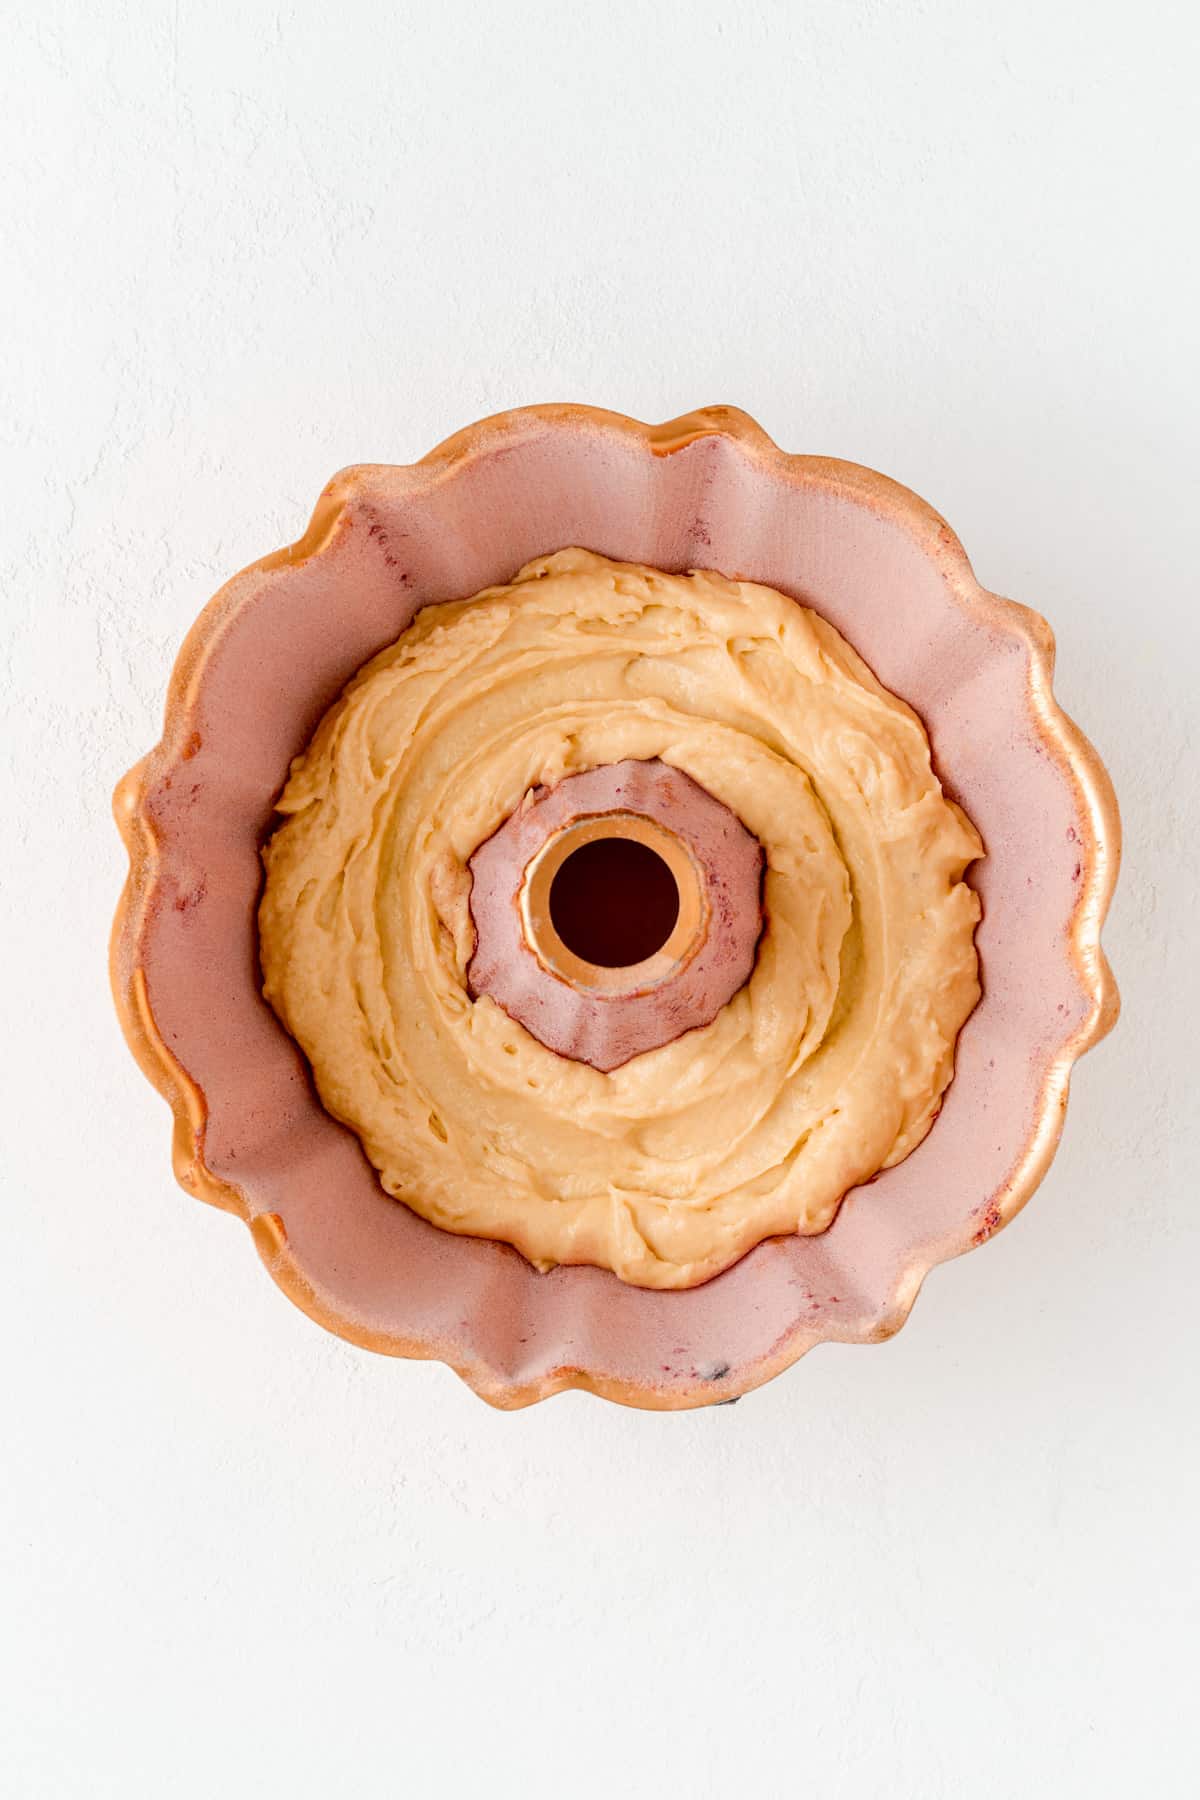 Copper Bundt pan with vanilla batter layer in bottom on white background.